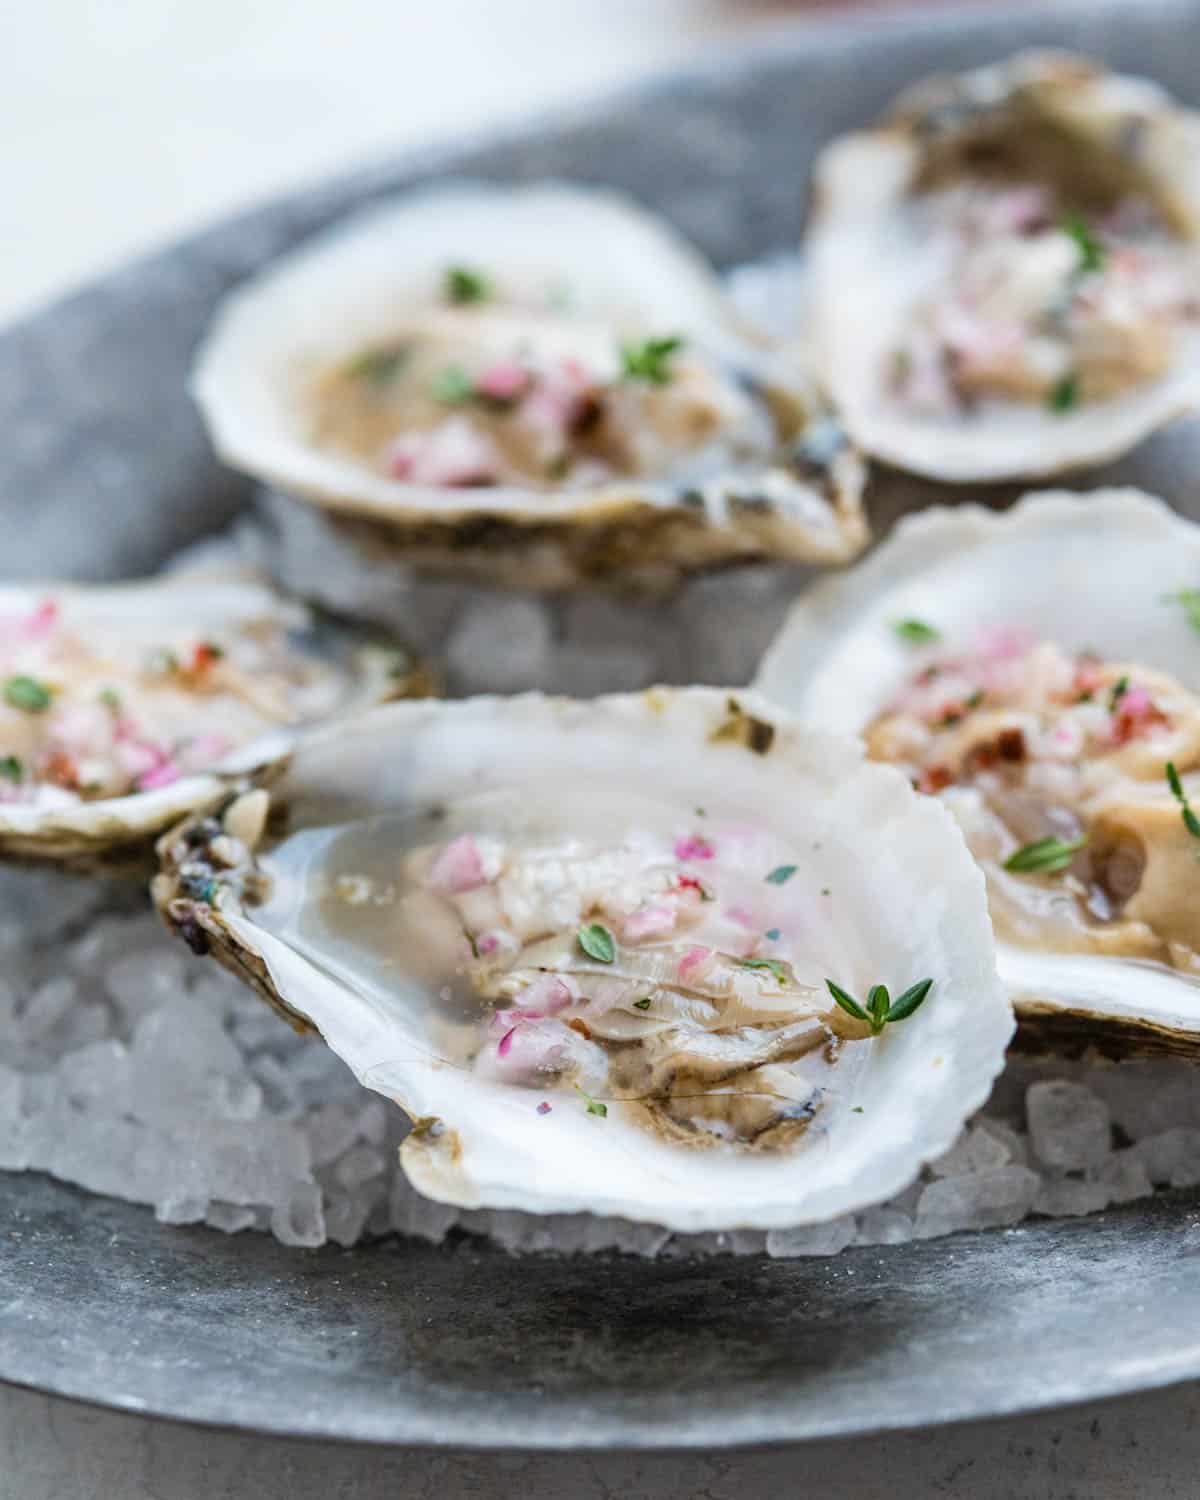 Serving oysters on the half shell with a spoonful of mignonette sauce.